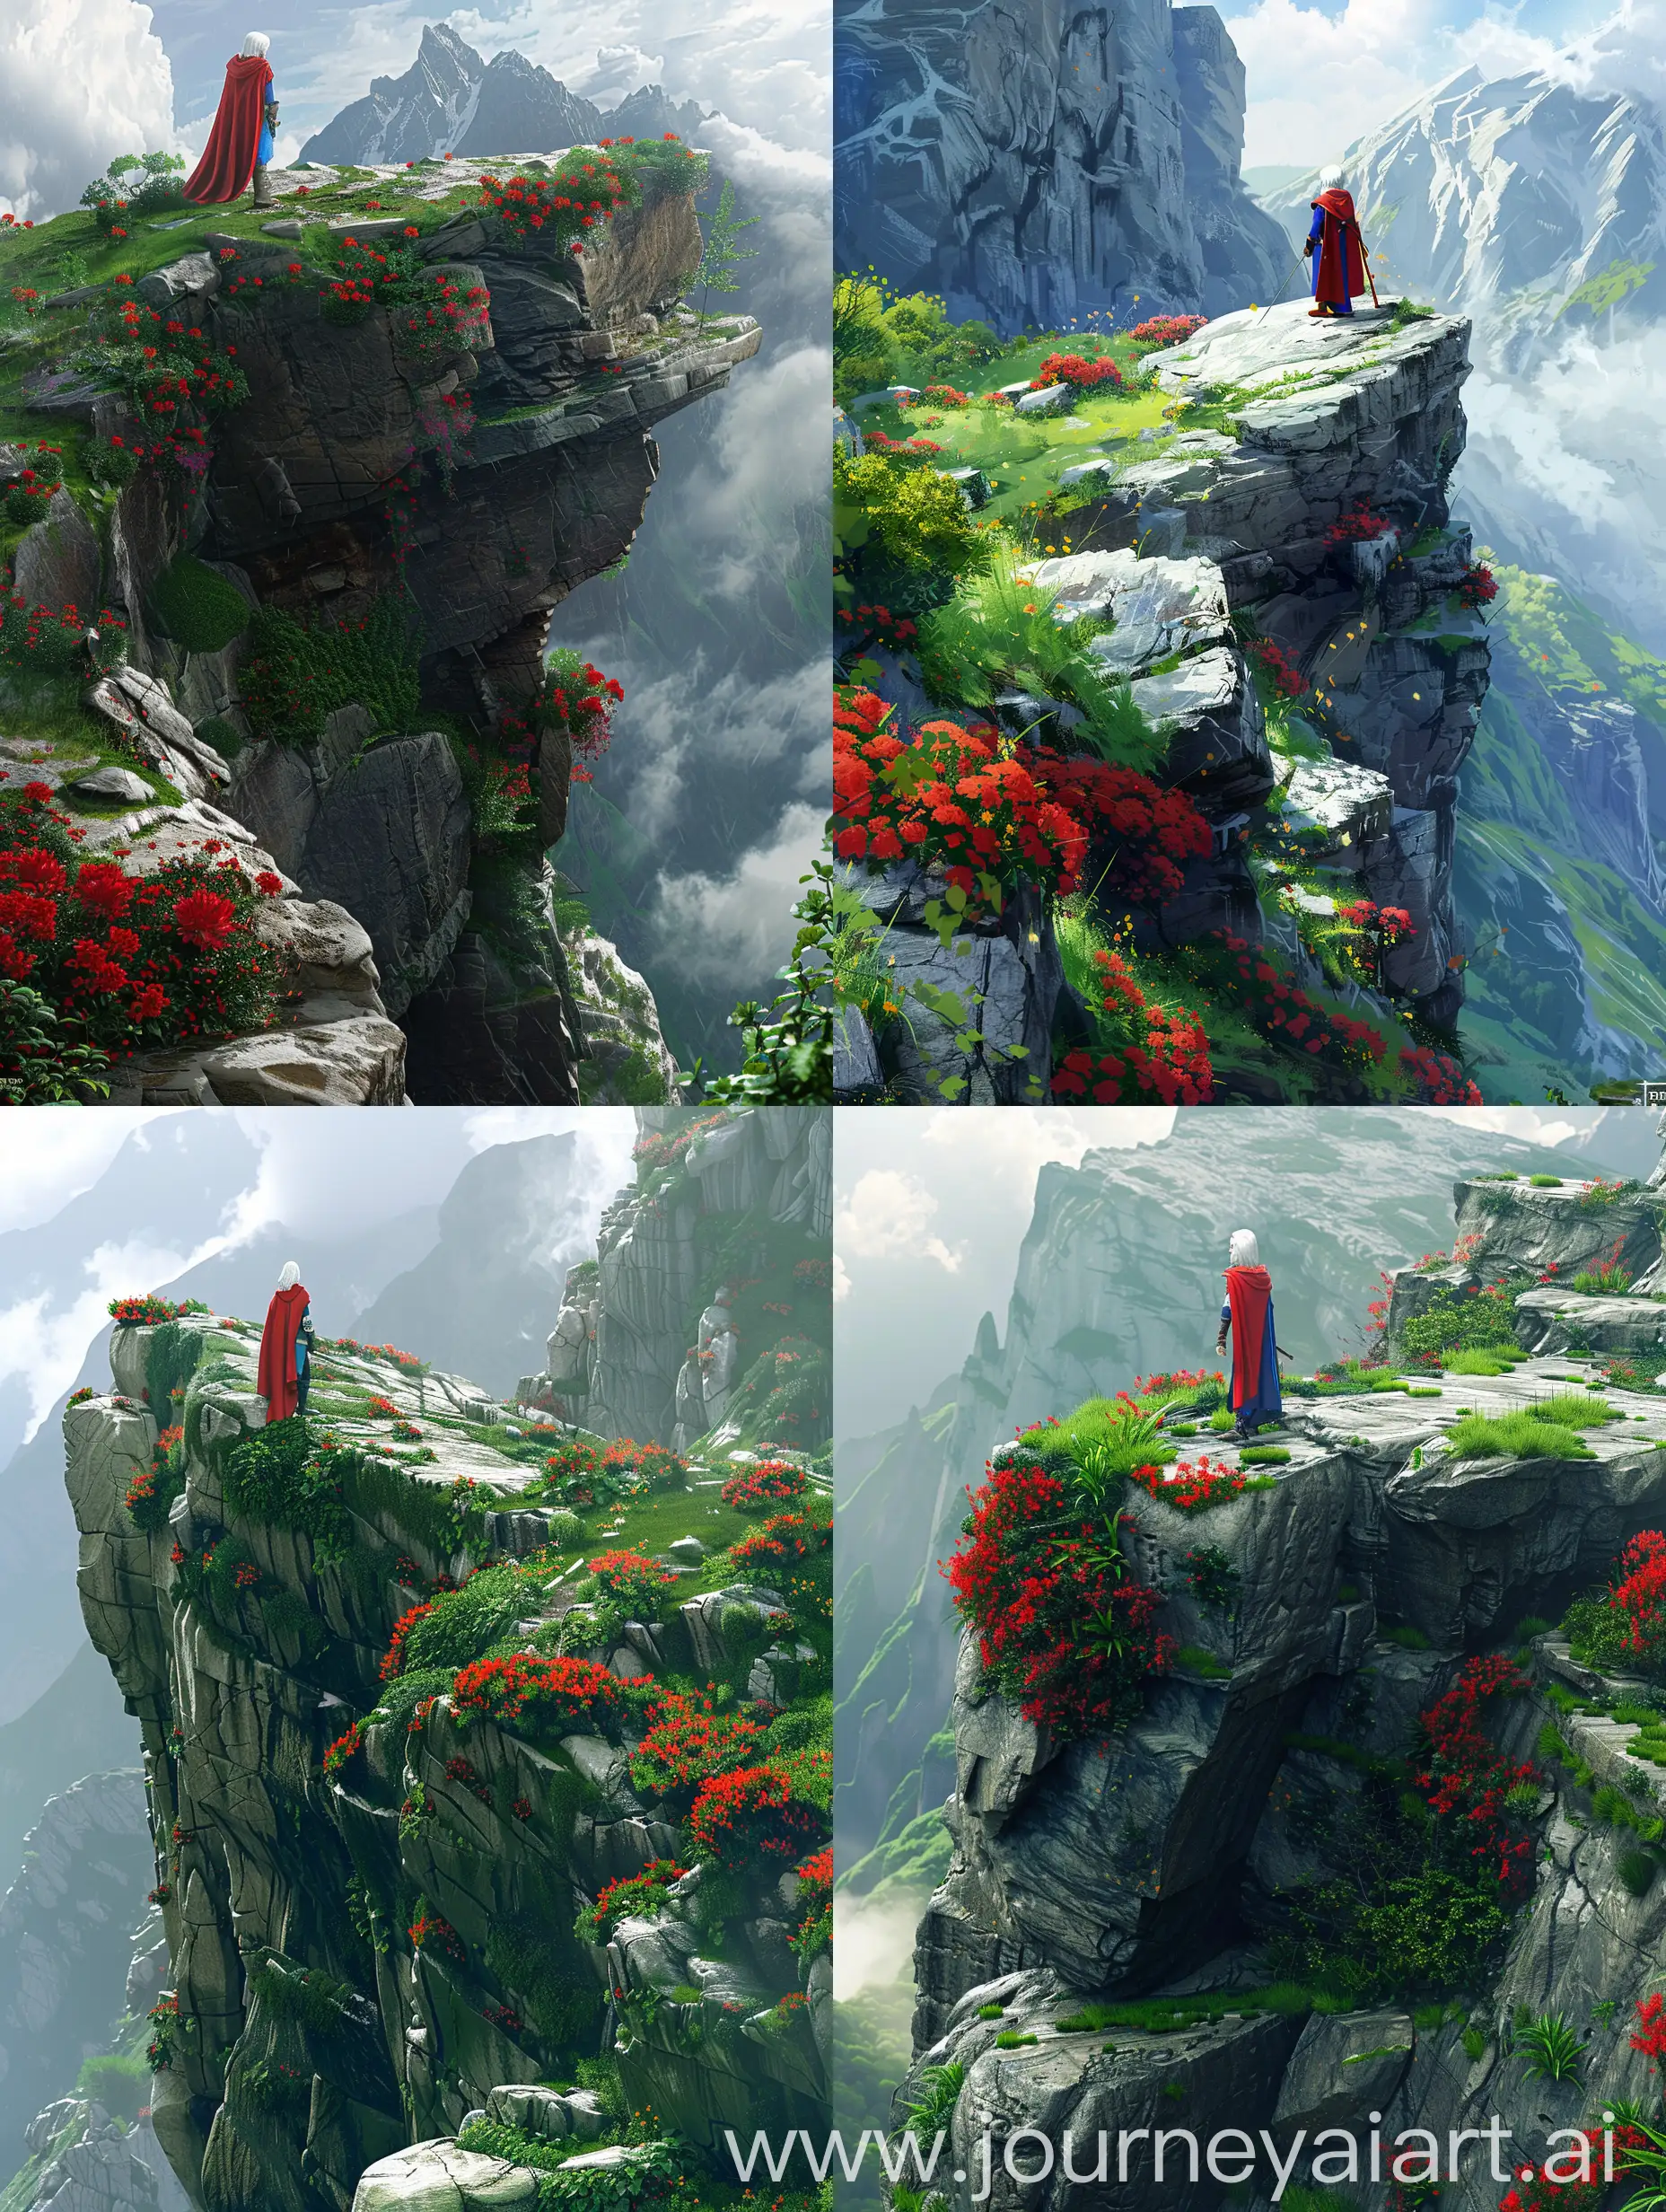 A medieval warrior stands on the edge of a rocky mountain, surrounded by lush greenery and vibrant red flowers. The warrior wears a red cloak and blue attire, their white hair contrasting against the natural backdrop. . The rocky cliff extends into the distance, adorned with green grass and bright red blooms. Beyond the cliff, majestic mountains rise, their peaks disappearing into fluffy white clouds. The overall atmosphere is serene and awe-inspiring.